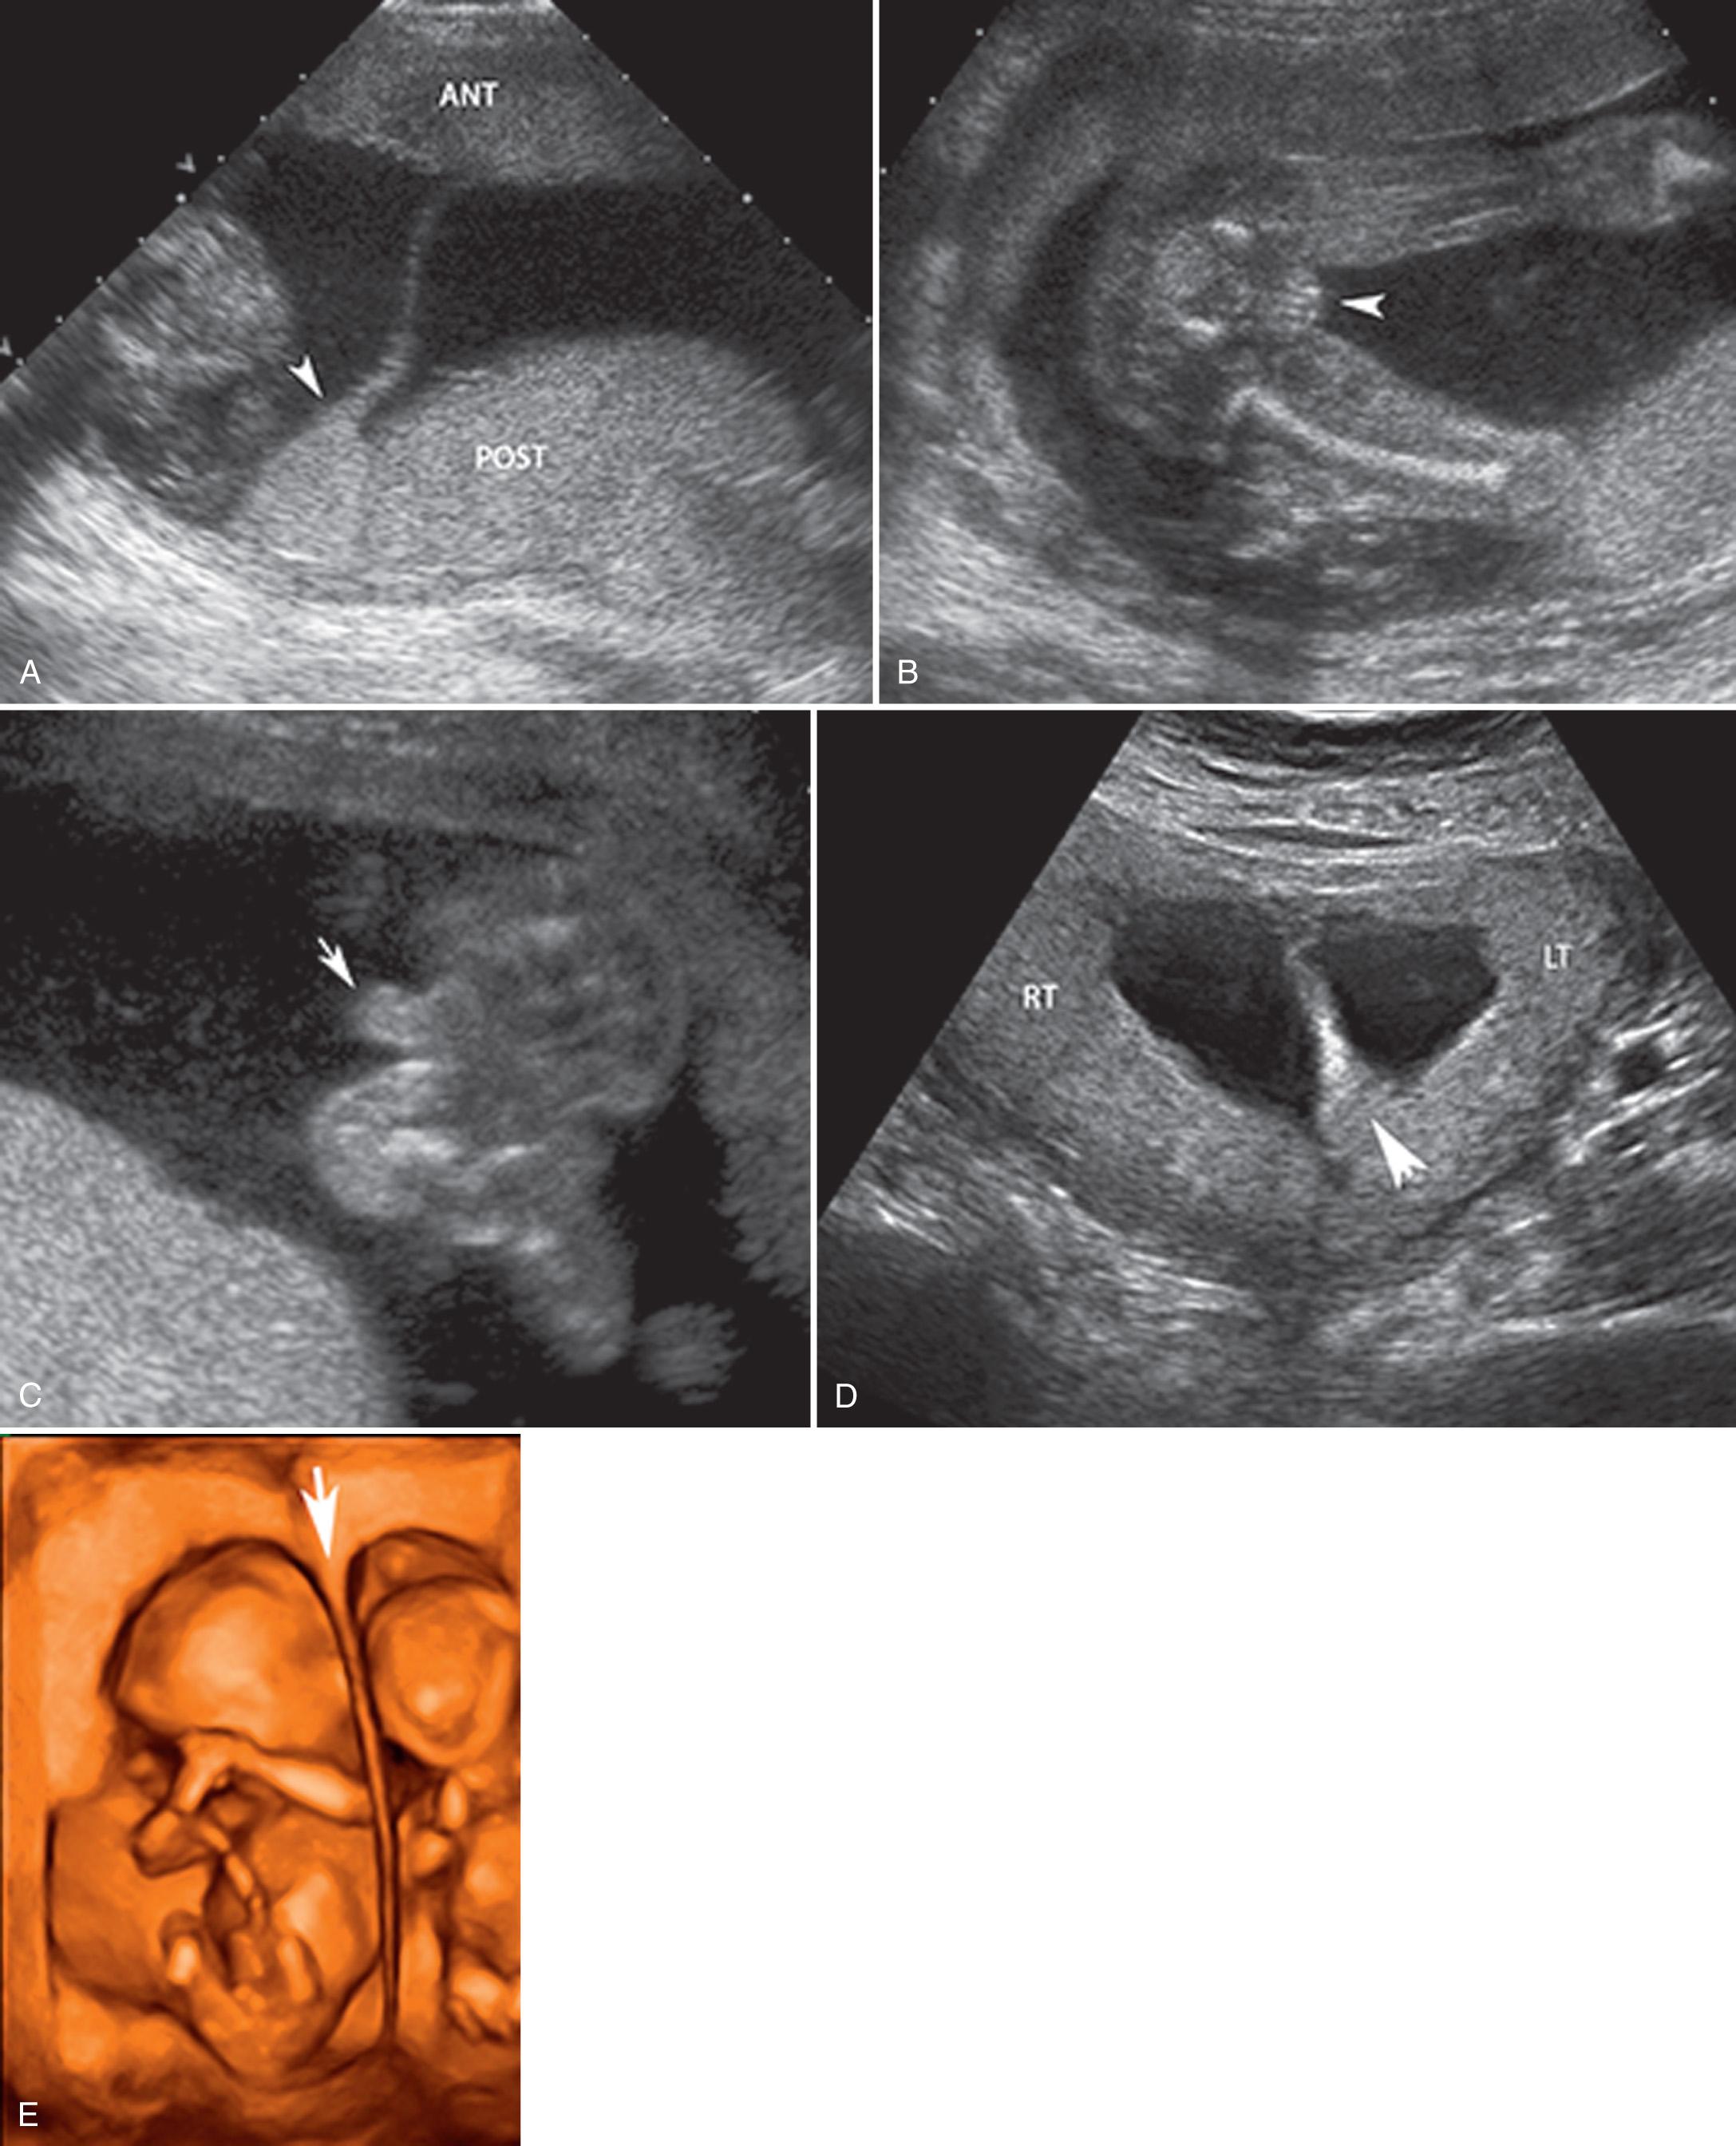 FIG. 32.4, Sonographic Findings Seen With Separate Chorions.